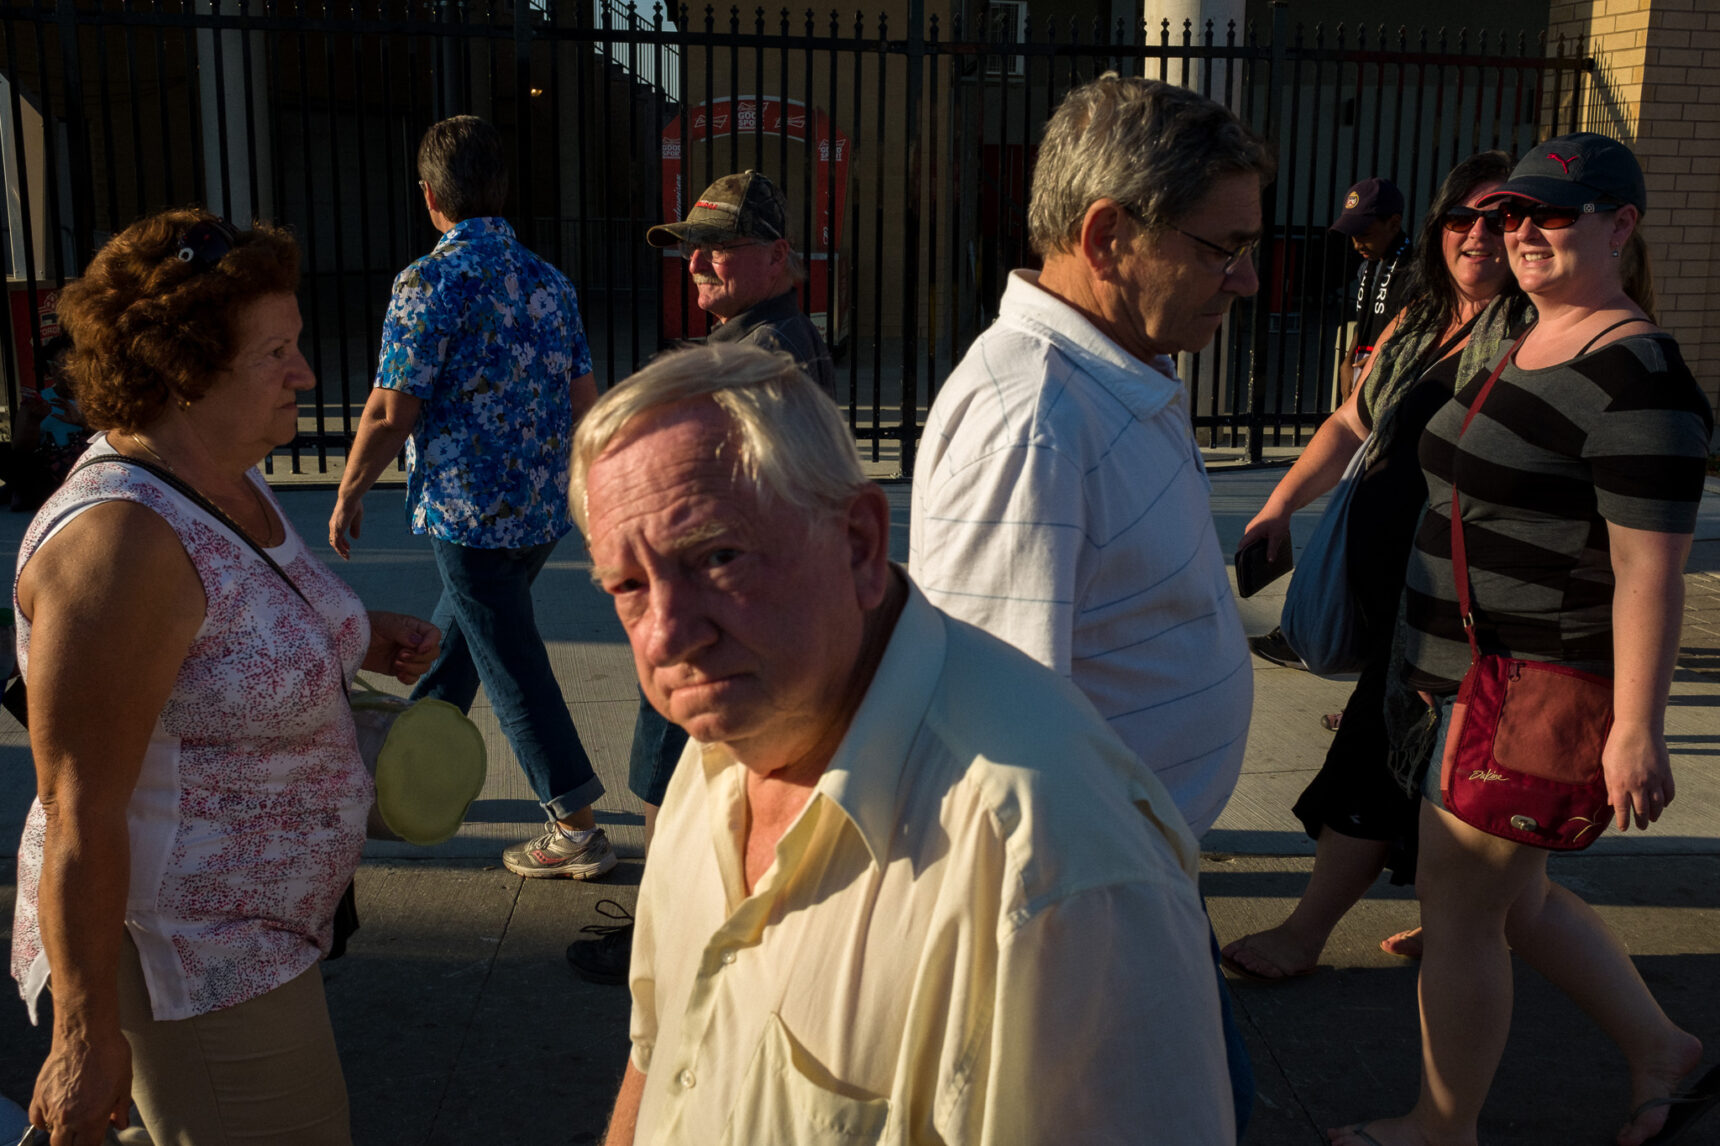 Street Photographer's Guide To The CNE - Dealing With Crowds